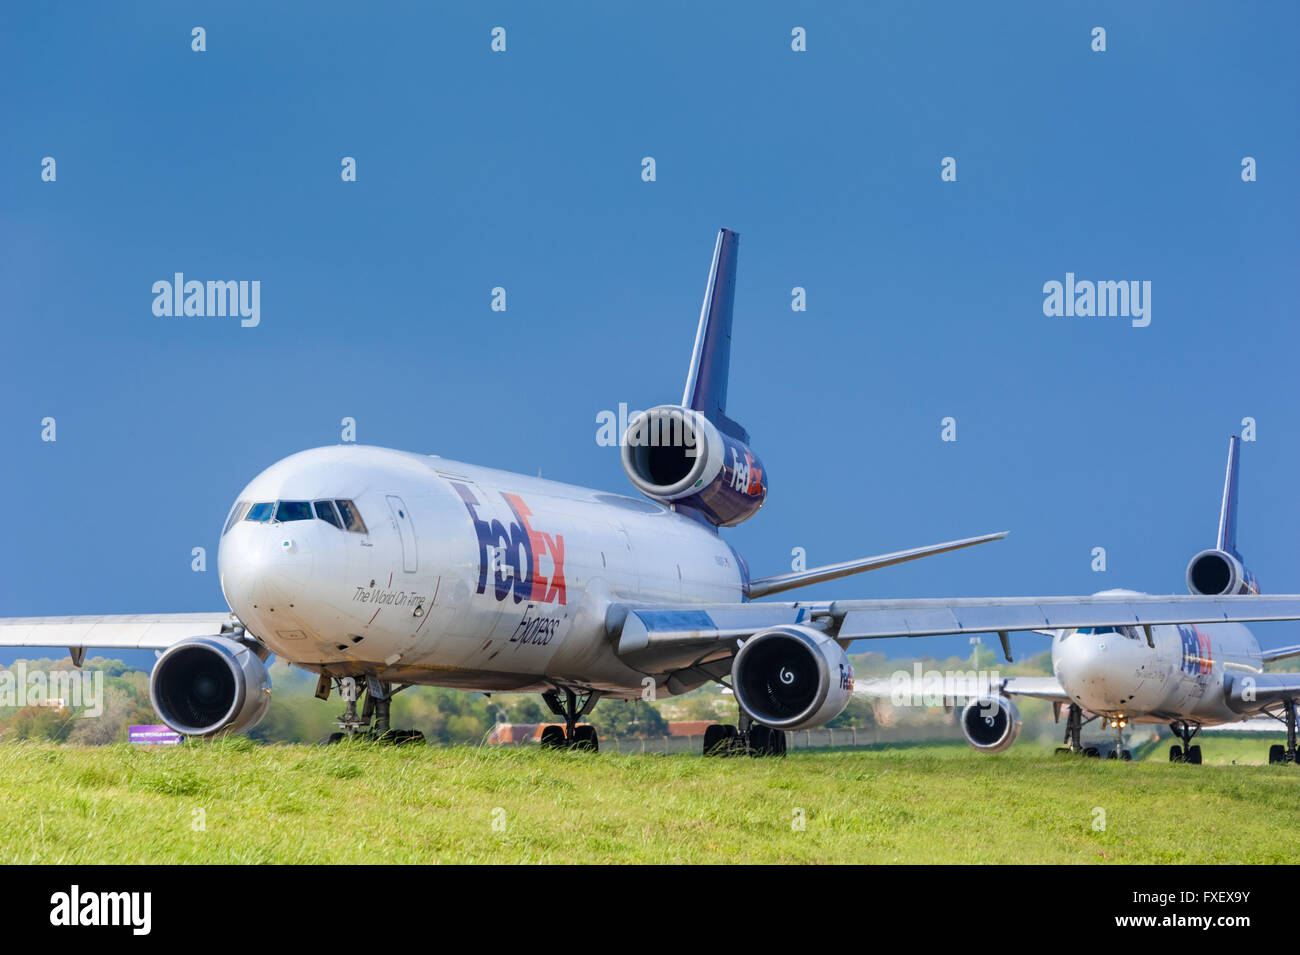 FedEx Express airline jets on taxiway at Memphis International Airport, FedEx's global headquarters in Memphis, Tennessee, USA. Stock Photo